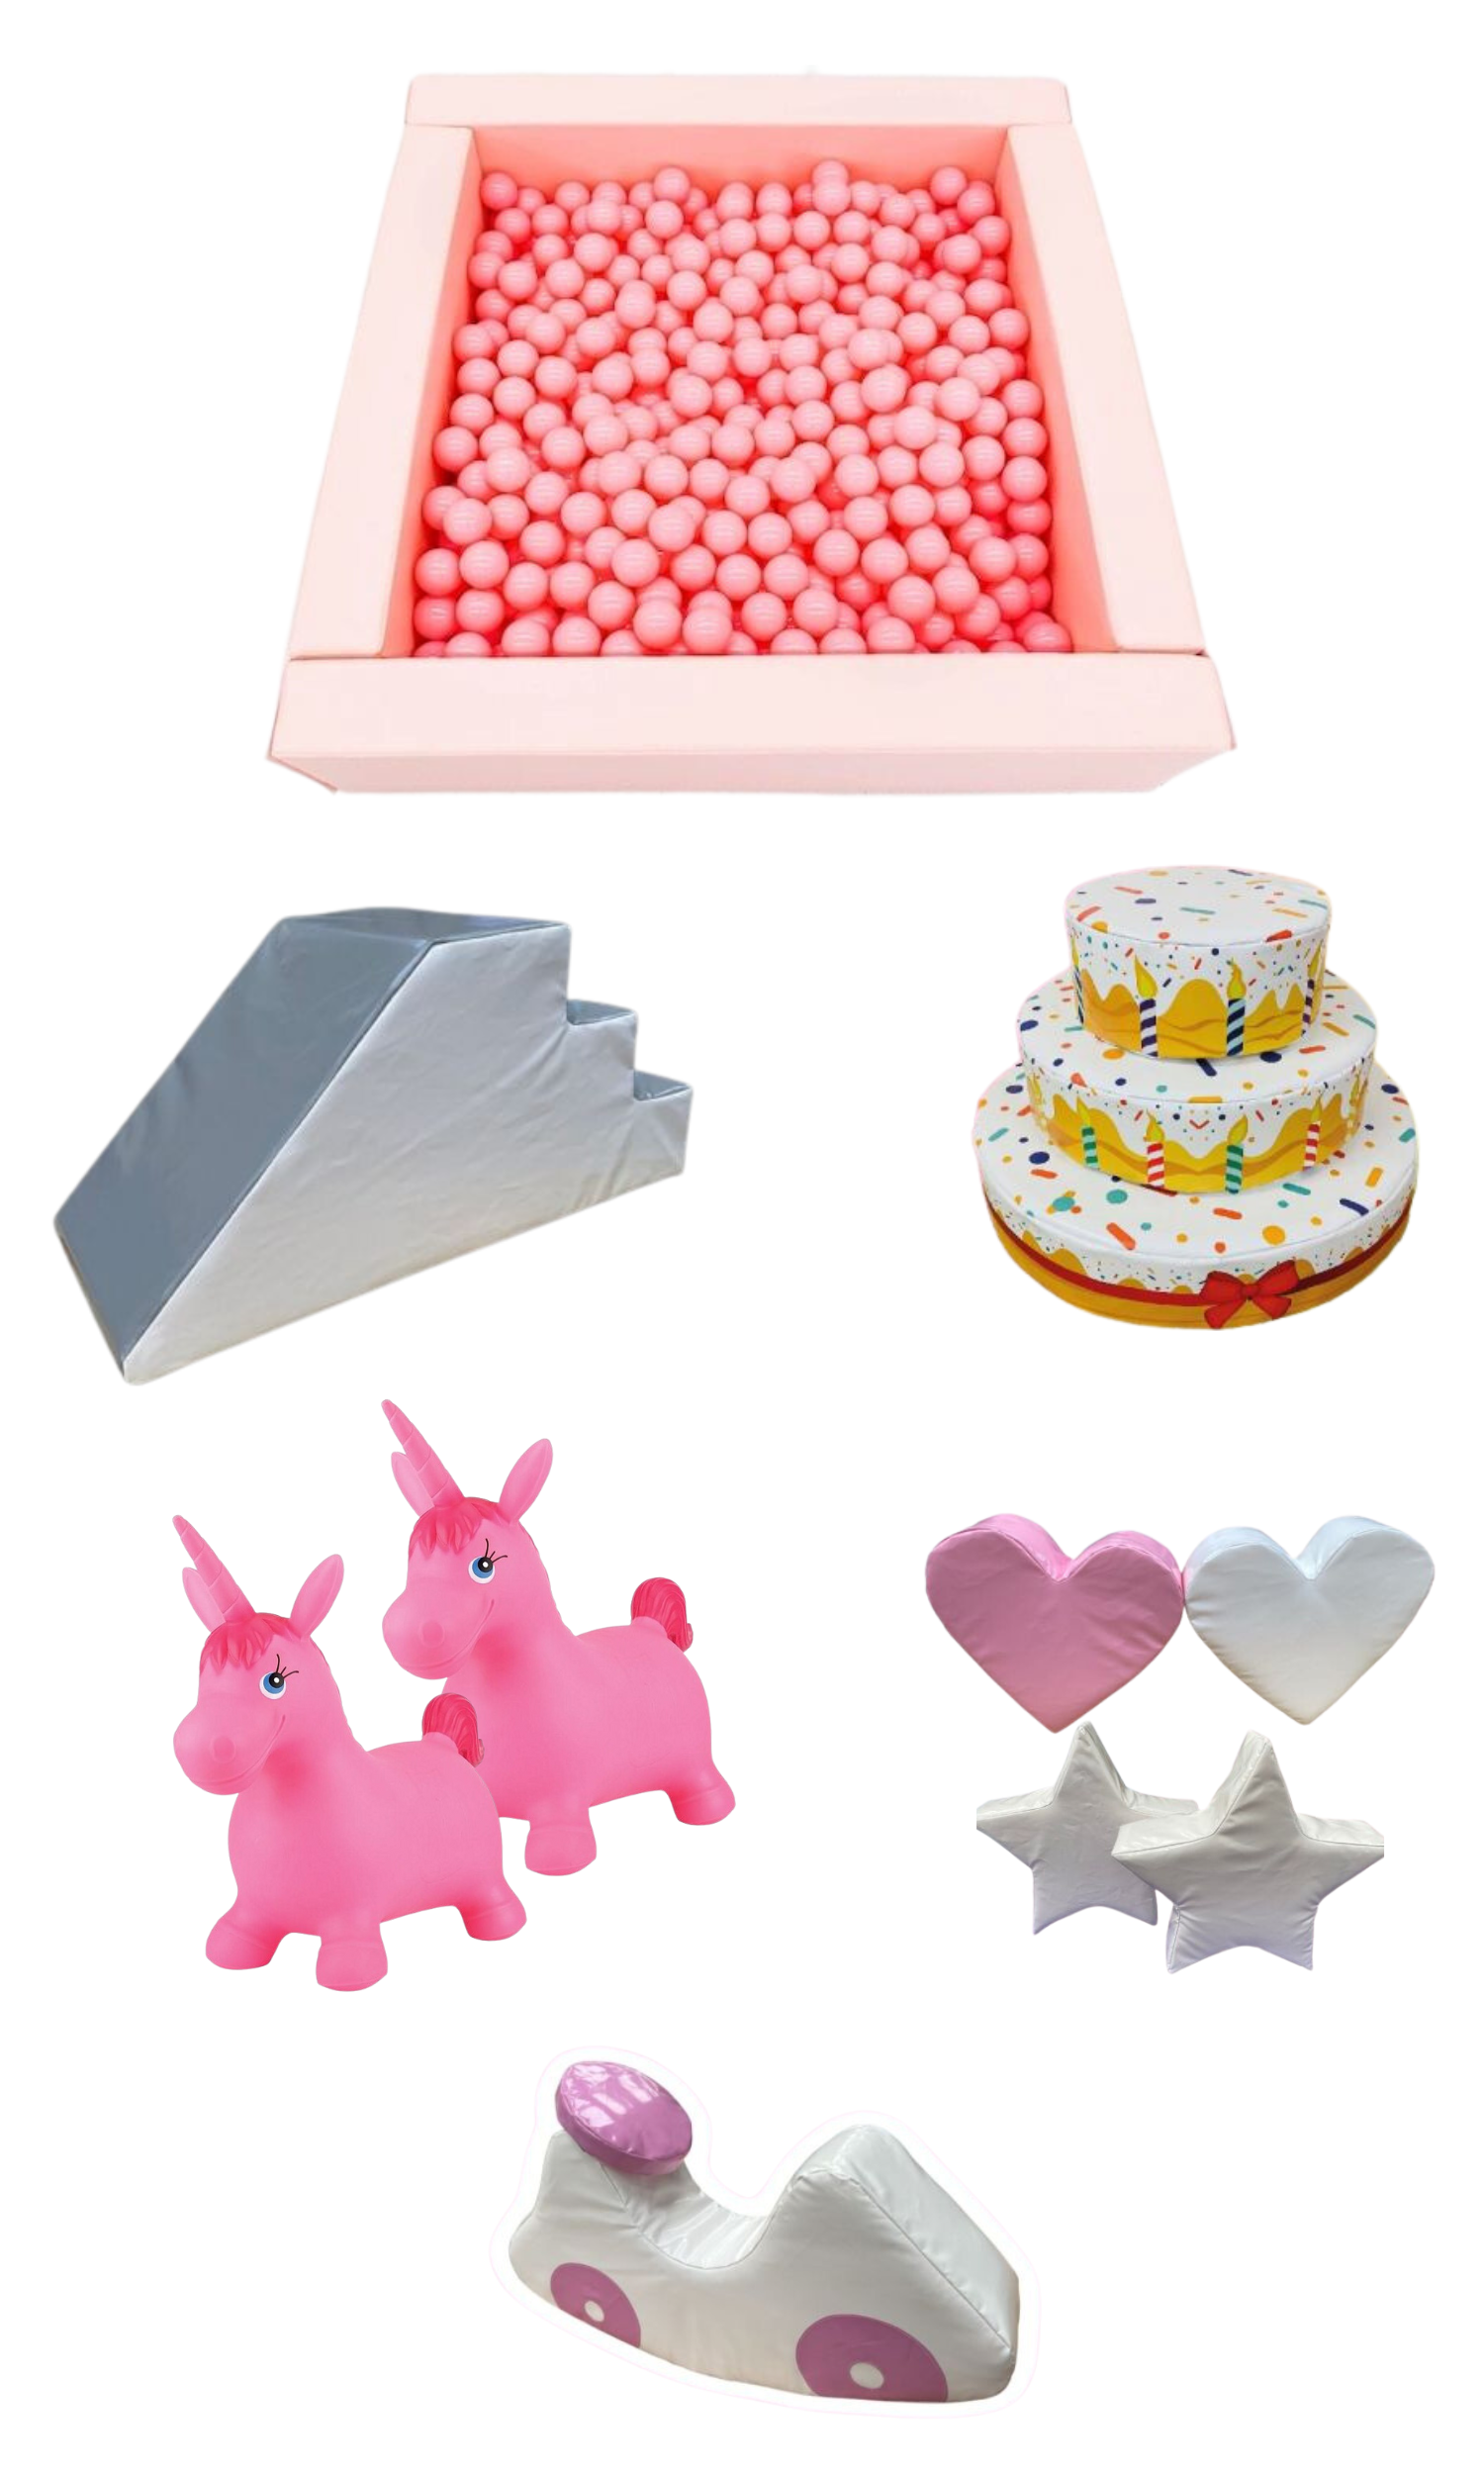 PINK SOFT PLAY PACKAGE